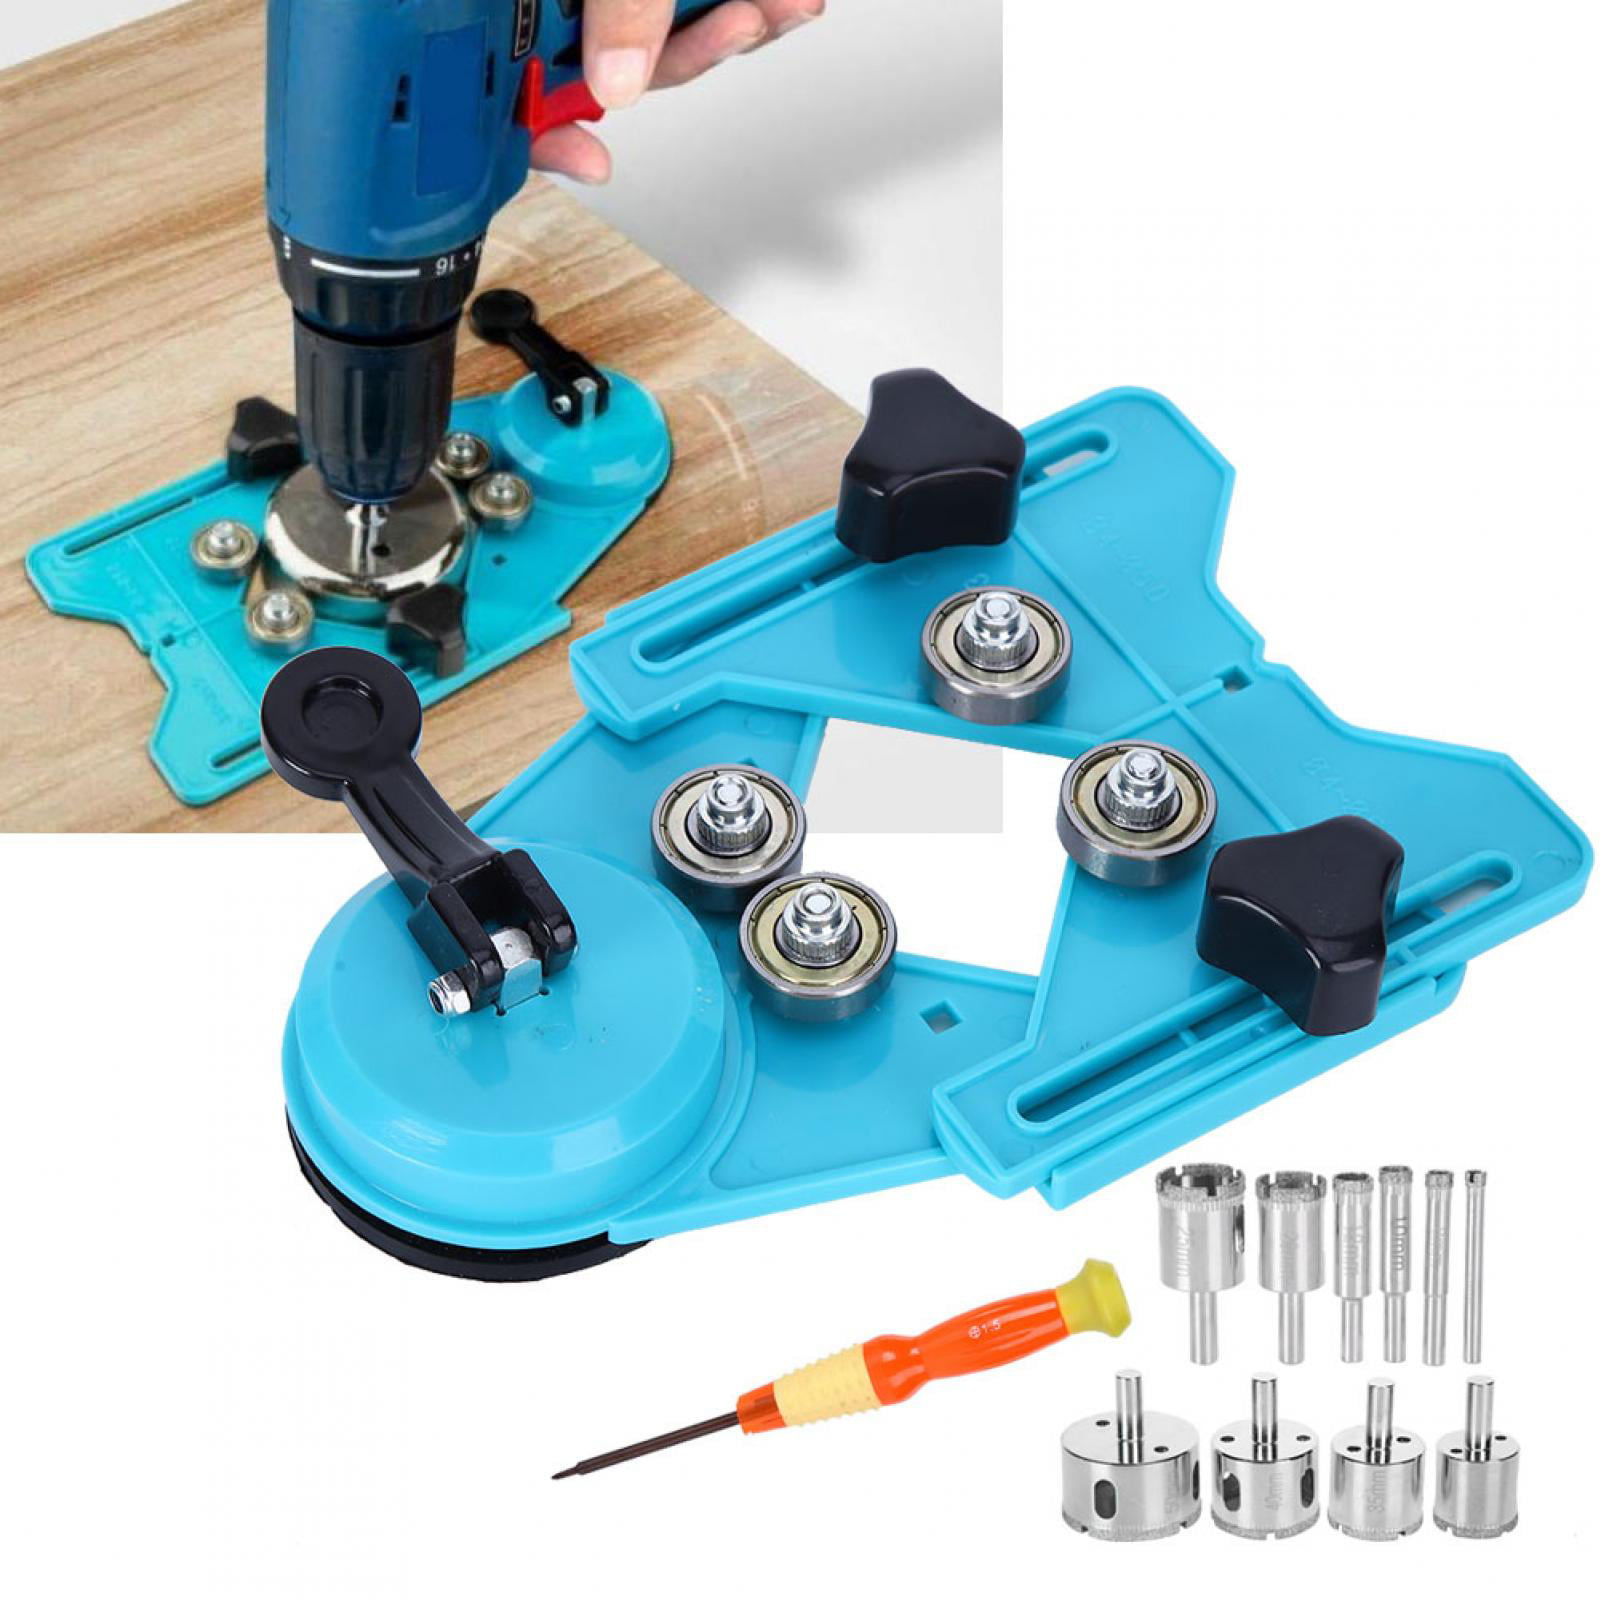 for Electric Hand Drills And Bench Drills Carpenter Tool Glass Hole Saw, Drilling Marble Concrete Tools 